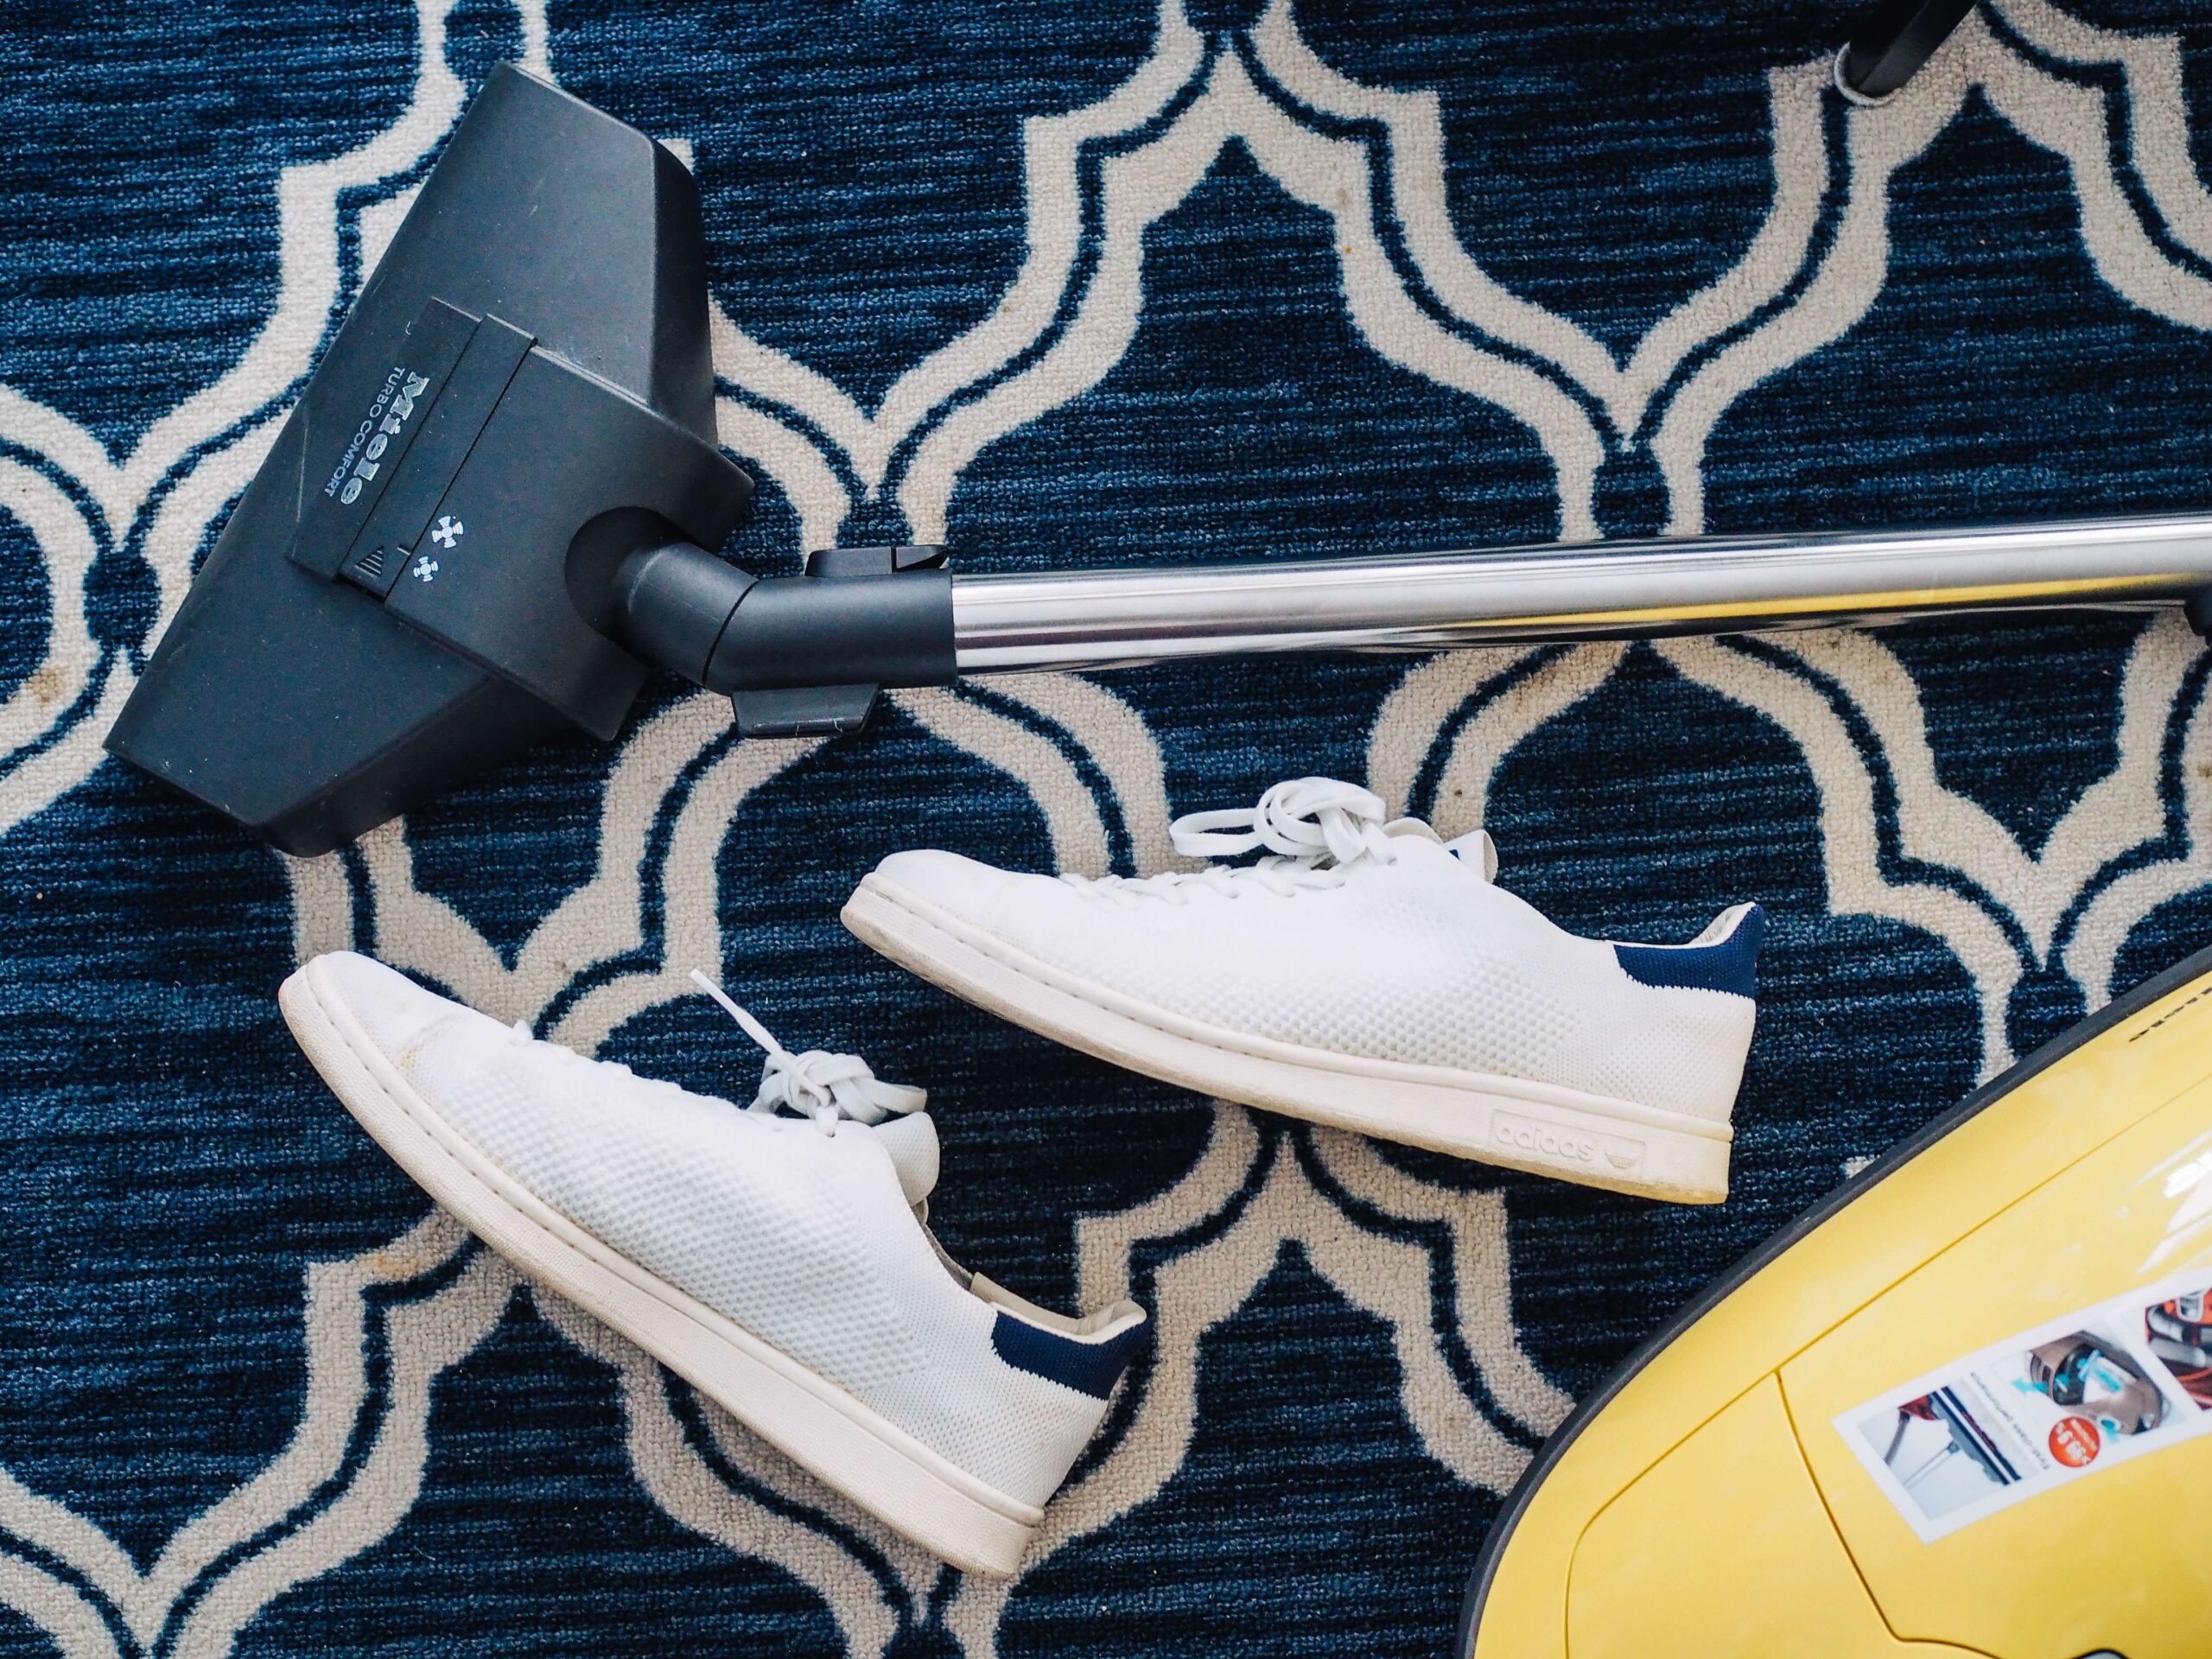 vacuum cleaner and shoes resting on patterned carpet